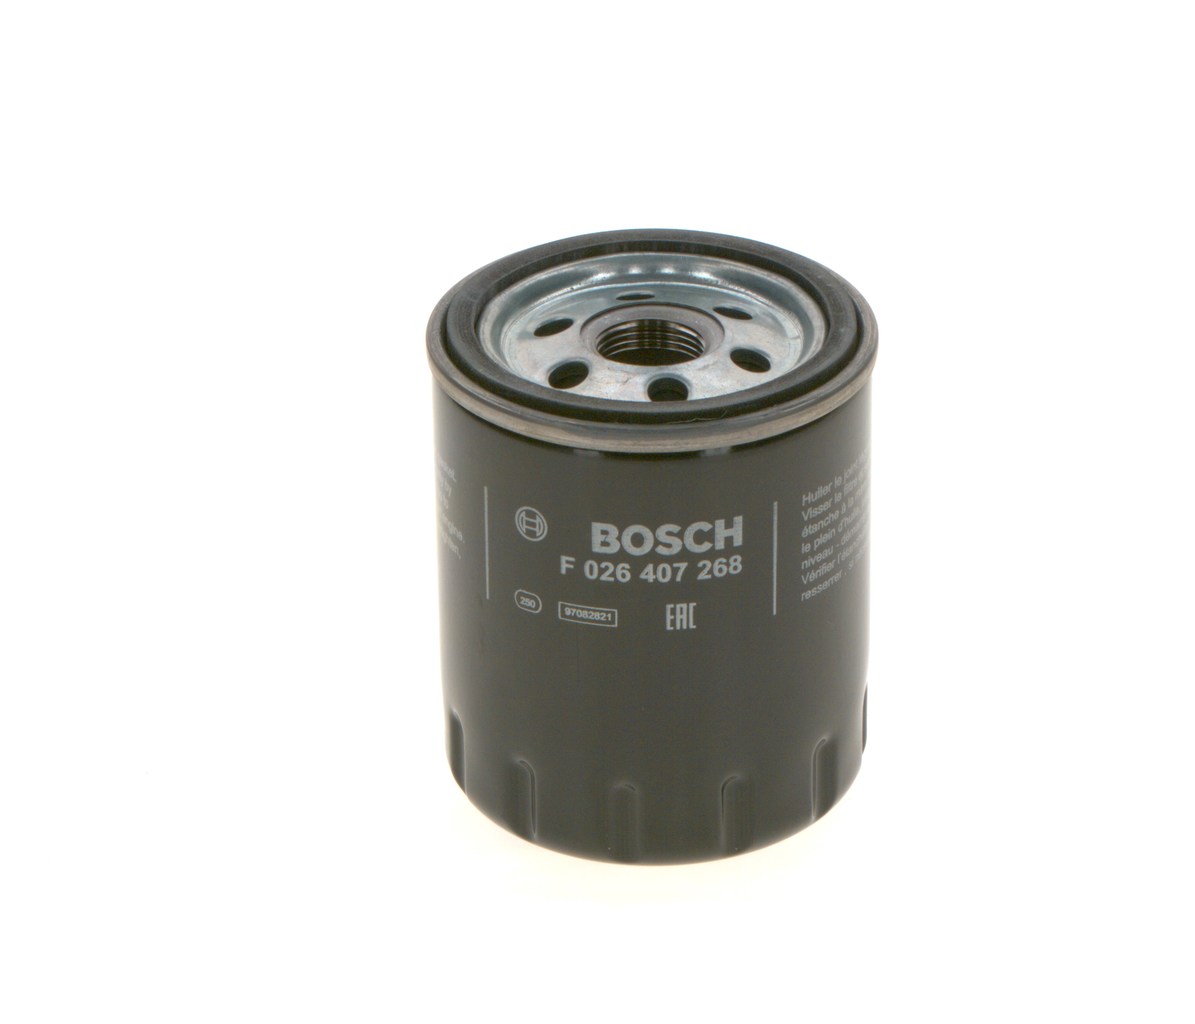 BOSCH F 026 407 268 Oil filter M 20 x 1,5, with one anti-return valve, Spin-on Filter